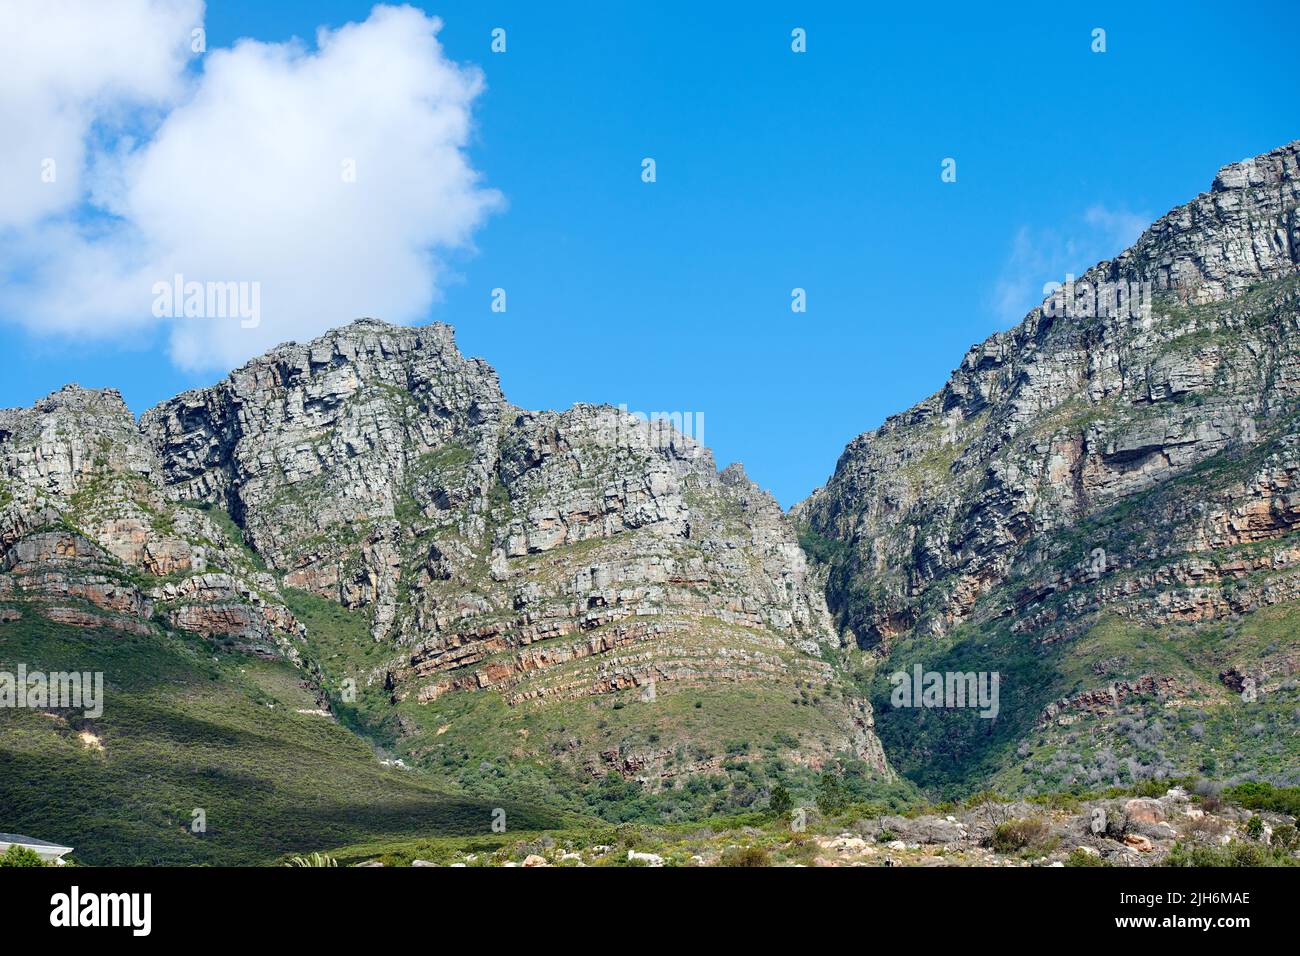 Scenic landscape of mountains in Western Cape, South Africa against a cloudy blue sky background with copyspace. Scenic of plants and shrubs growing Stock Photo